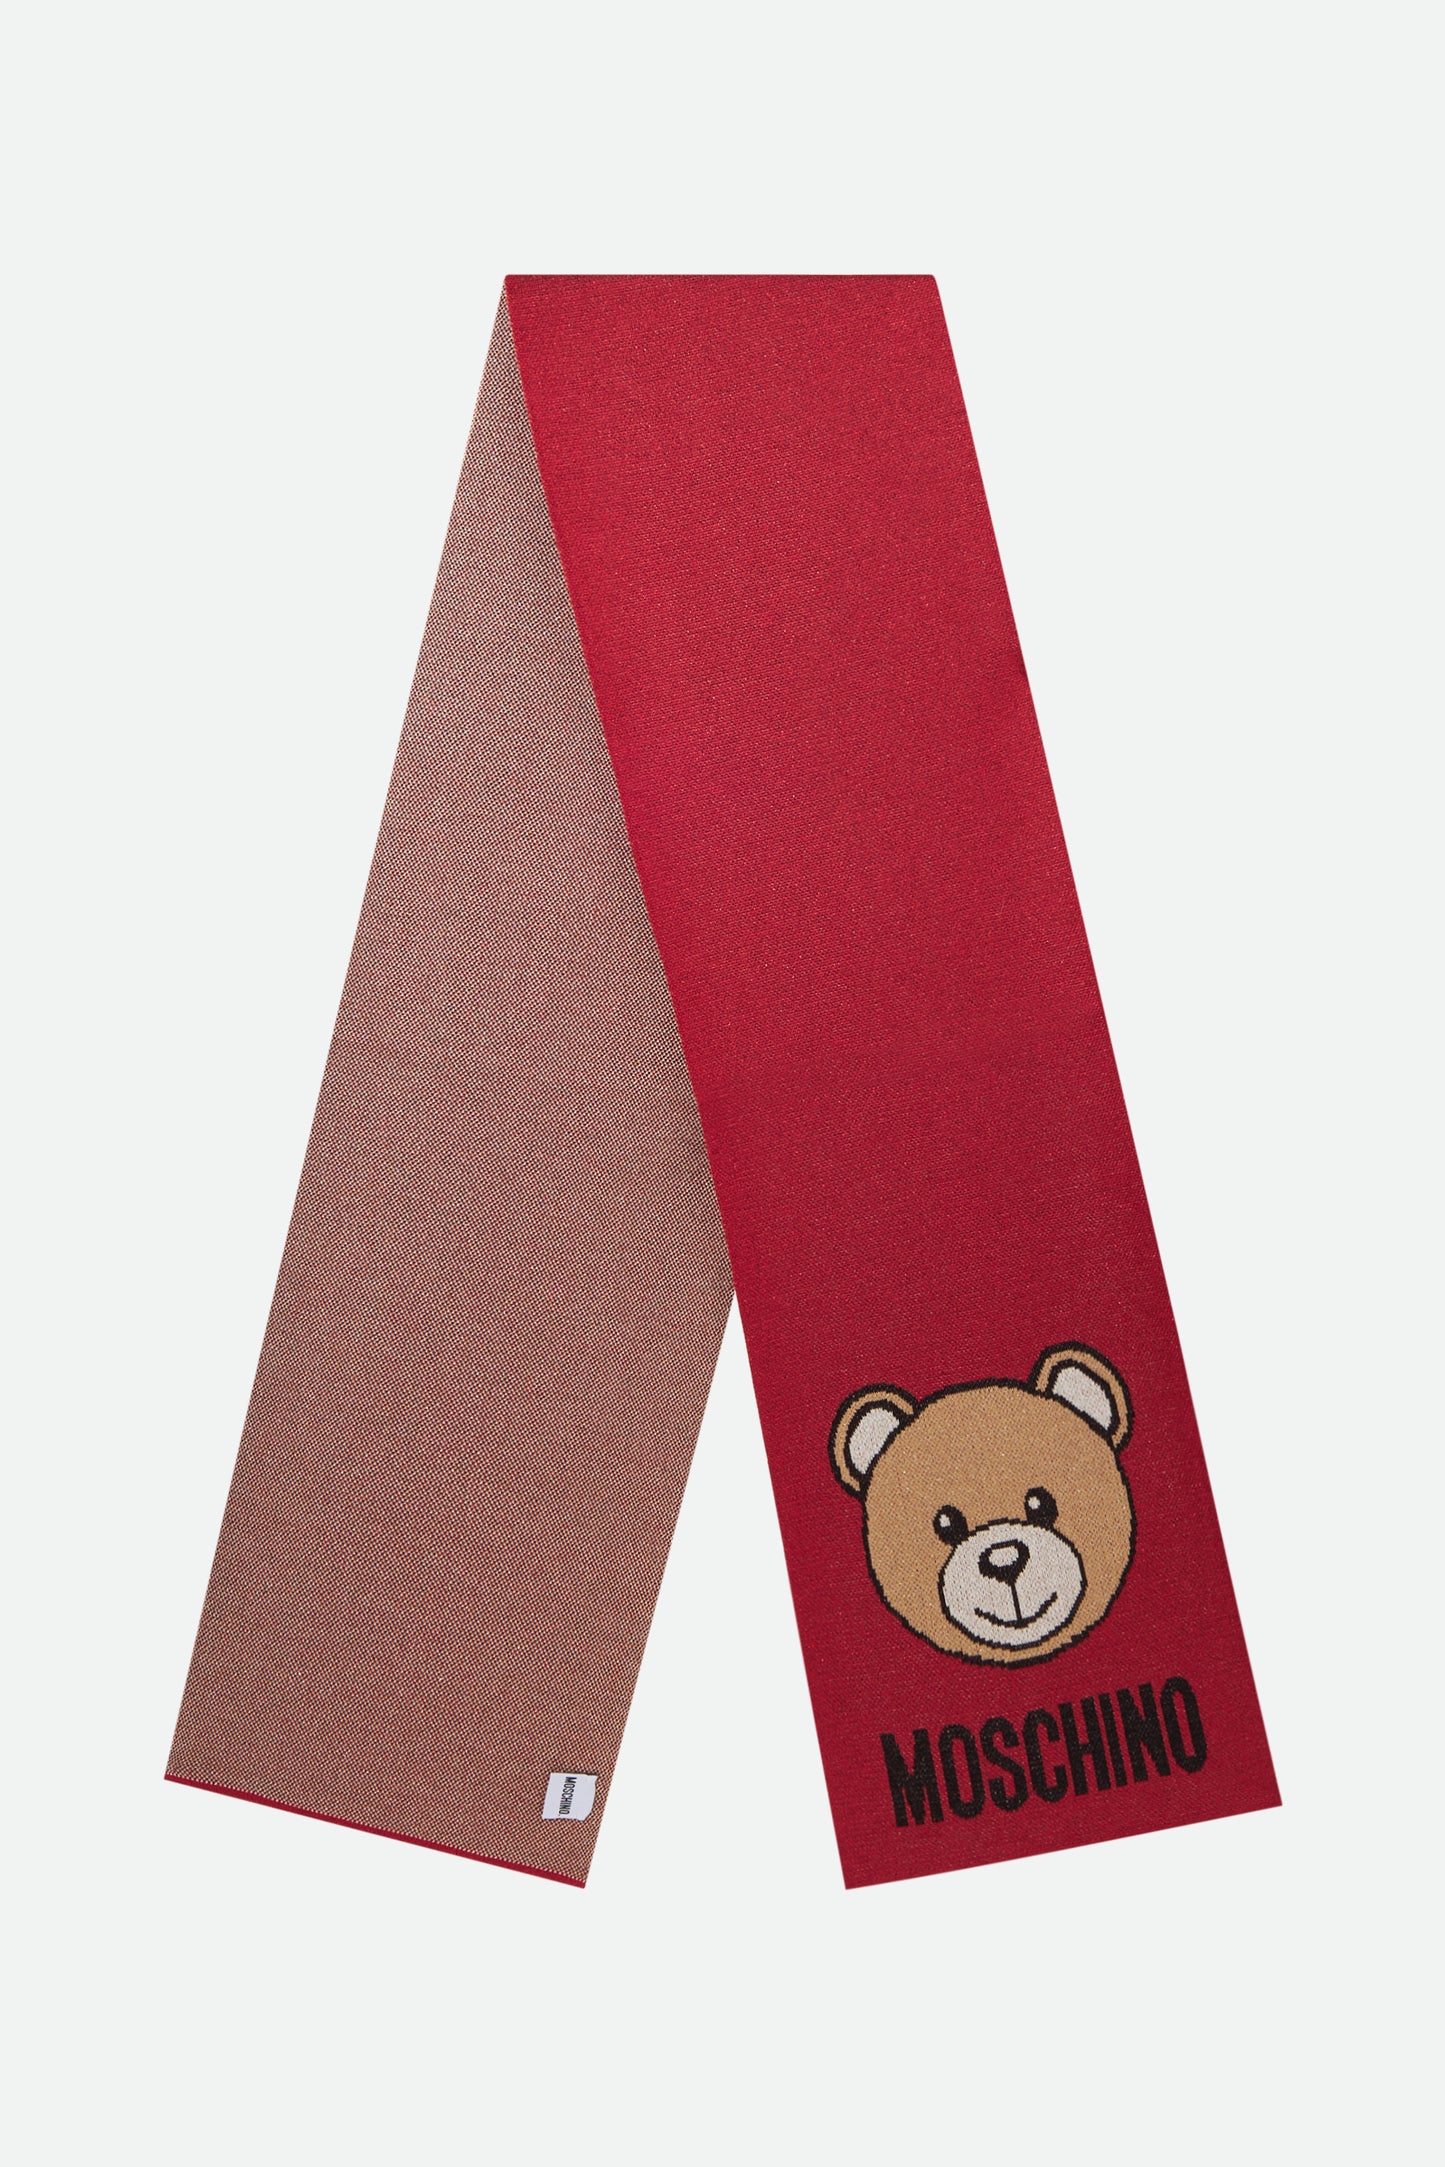 Moschino Bordeaux Scarf